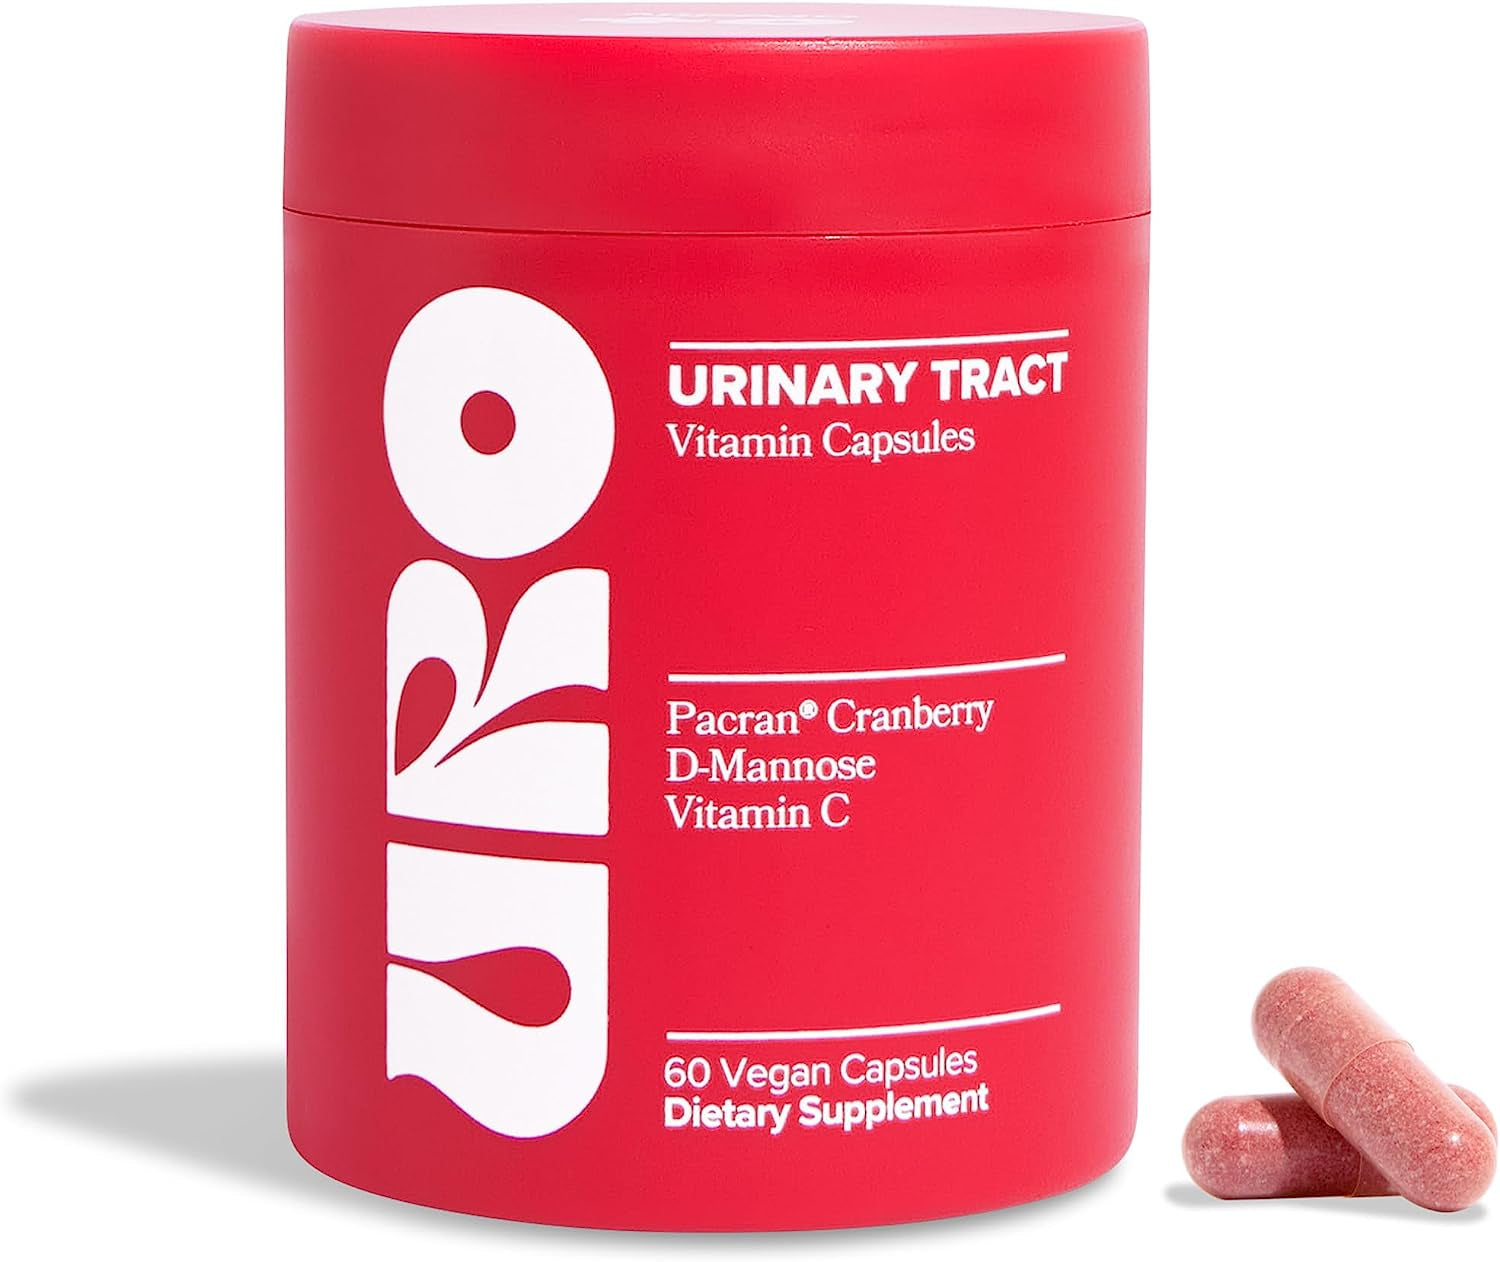 O Positiv URO Urinary Tract Health Supplement for Women, 60 Count (Pack of 1) - Urinary Support Vitamins with Pacran Complete Cranberry Extract, D-Mannose, & Vitamin C - Vegan & Gluten-Free